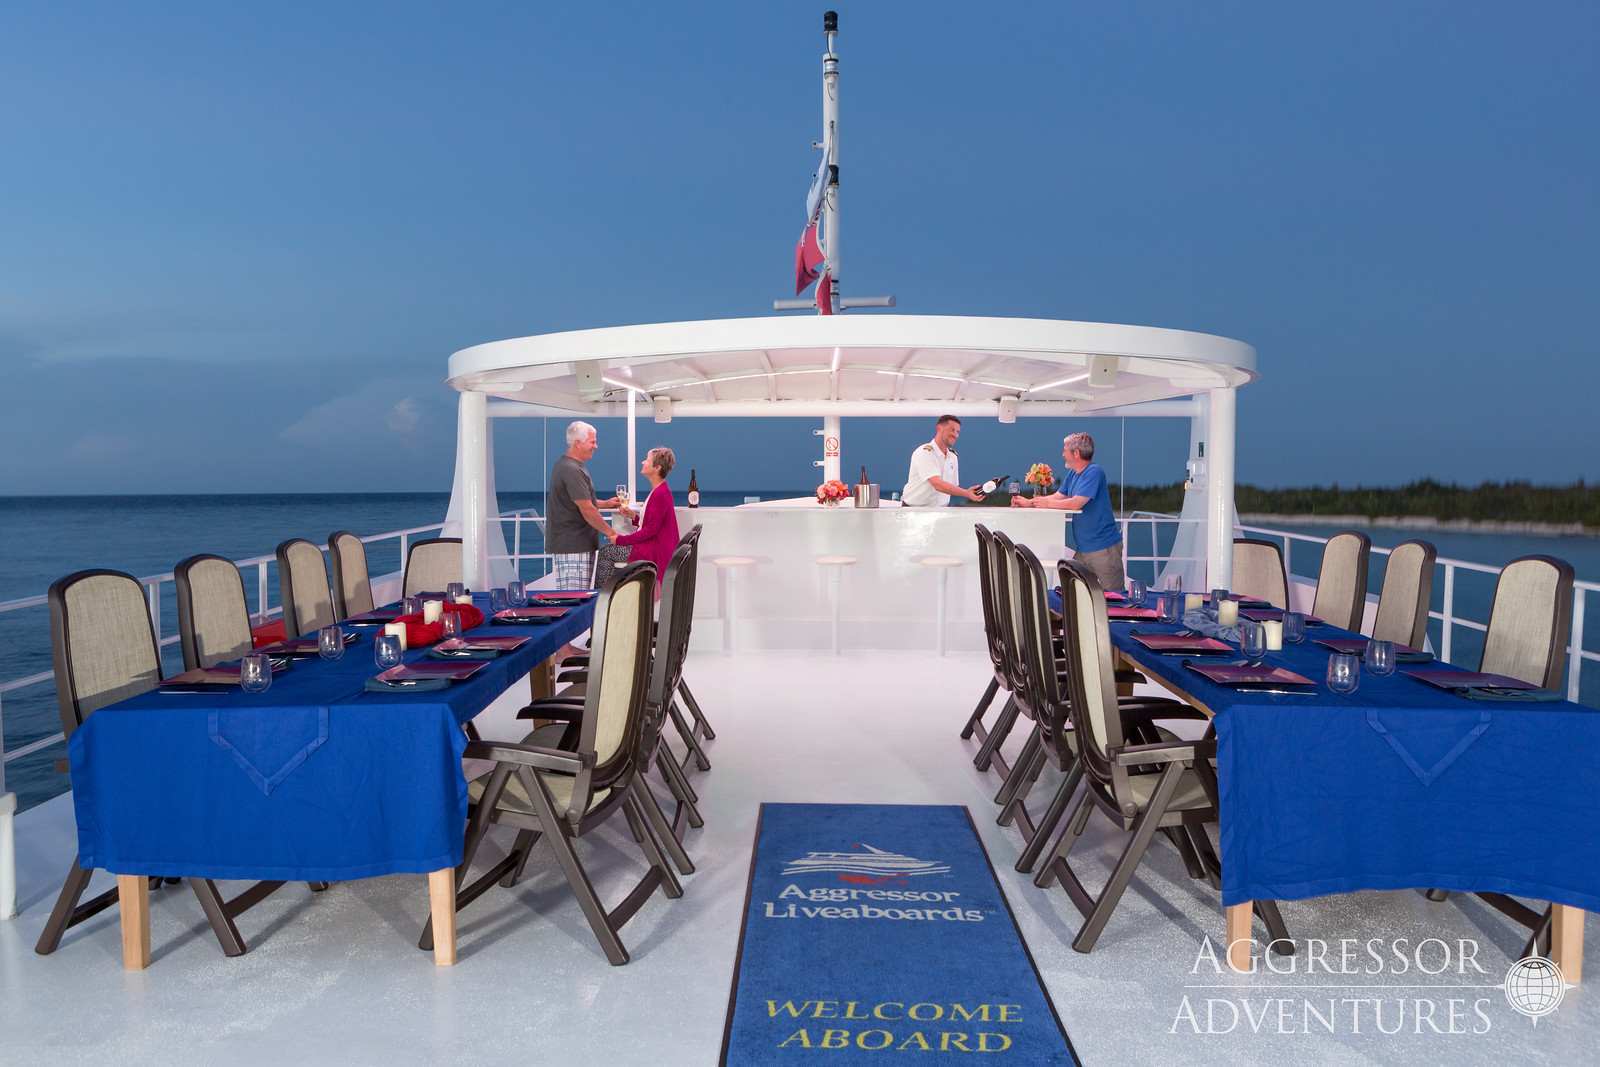 On top of the Cayman Aggressor V, there are several tables laid out with chair and table cloths. In the back, there is a bartender serving a couple at a bar.